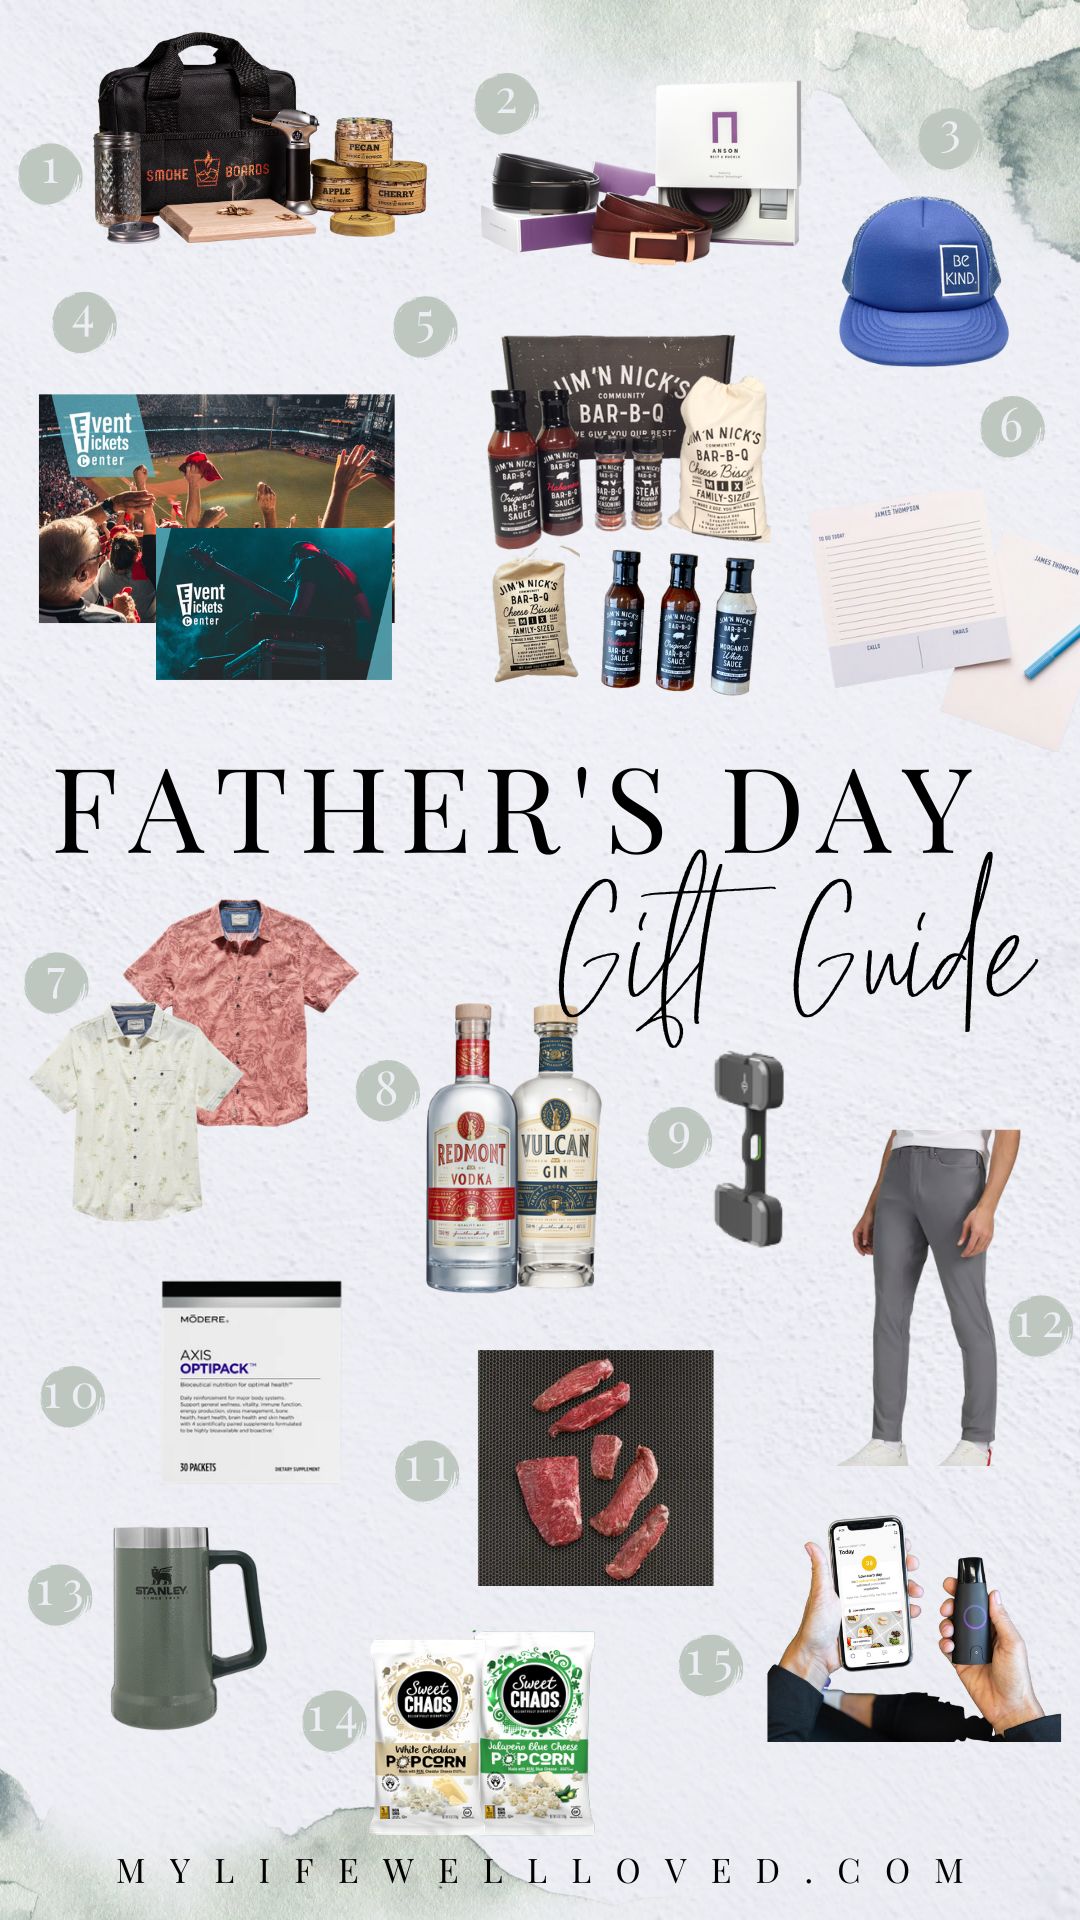 https://www.mylifewellloved.com/wp-content/uploads/MLWL-2022-FATHERS-DAY.jpg